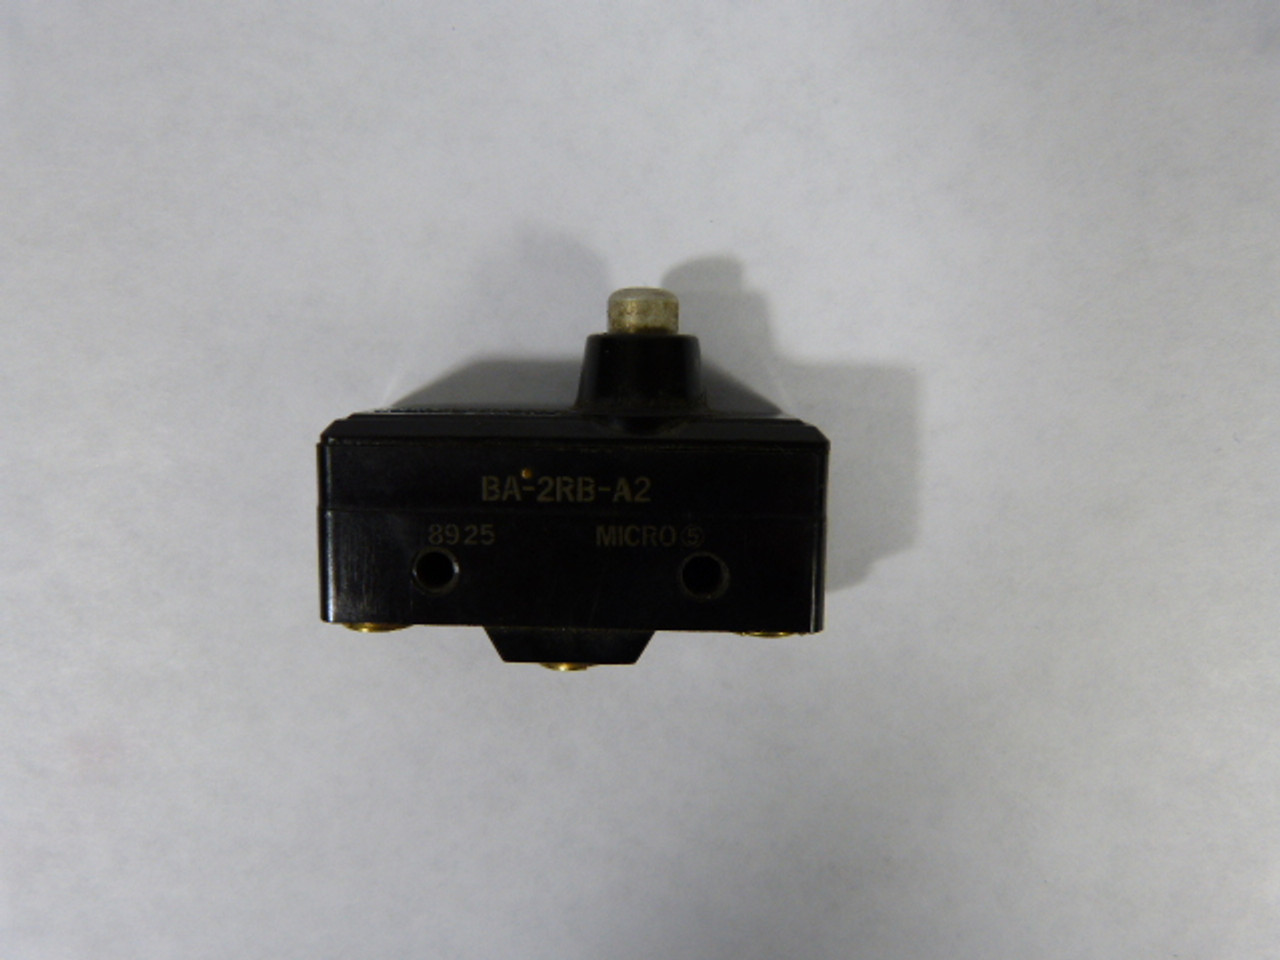 Microswitch BA-2RB-A2 Snap Action Basic Switch Plunger Actuator 20amp USED